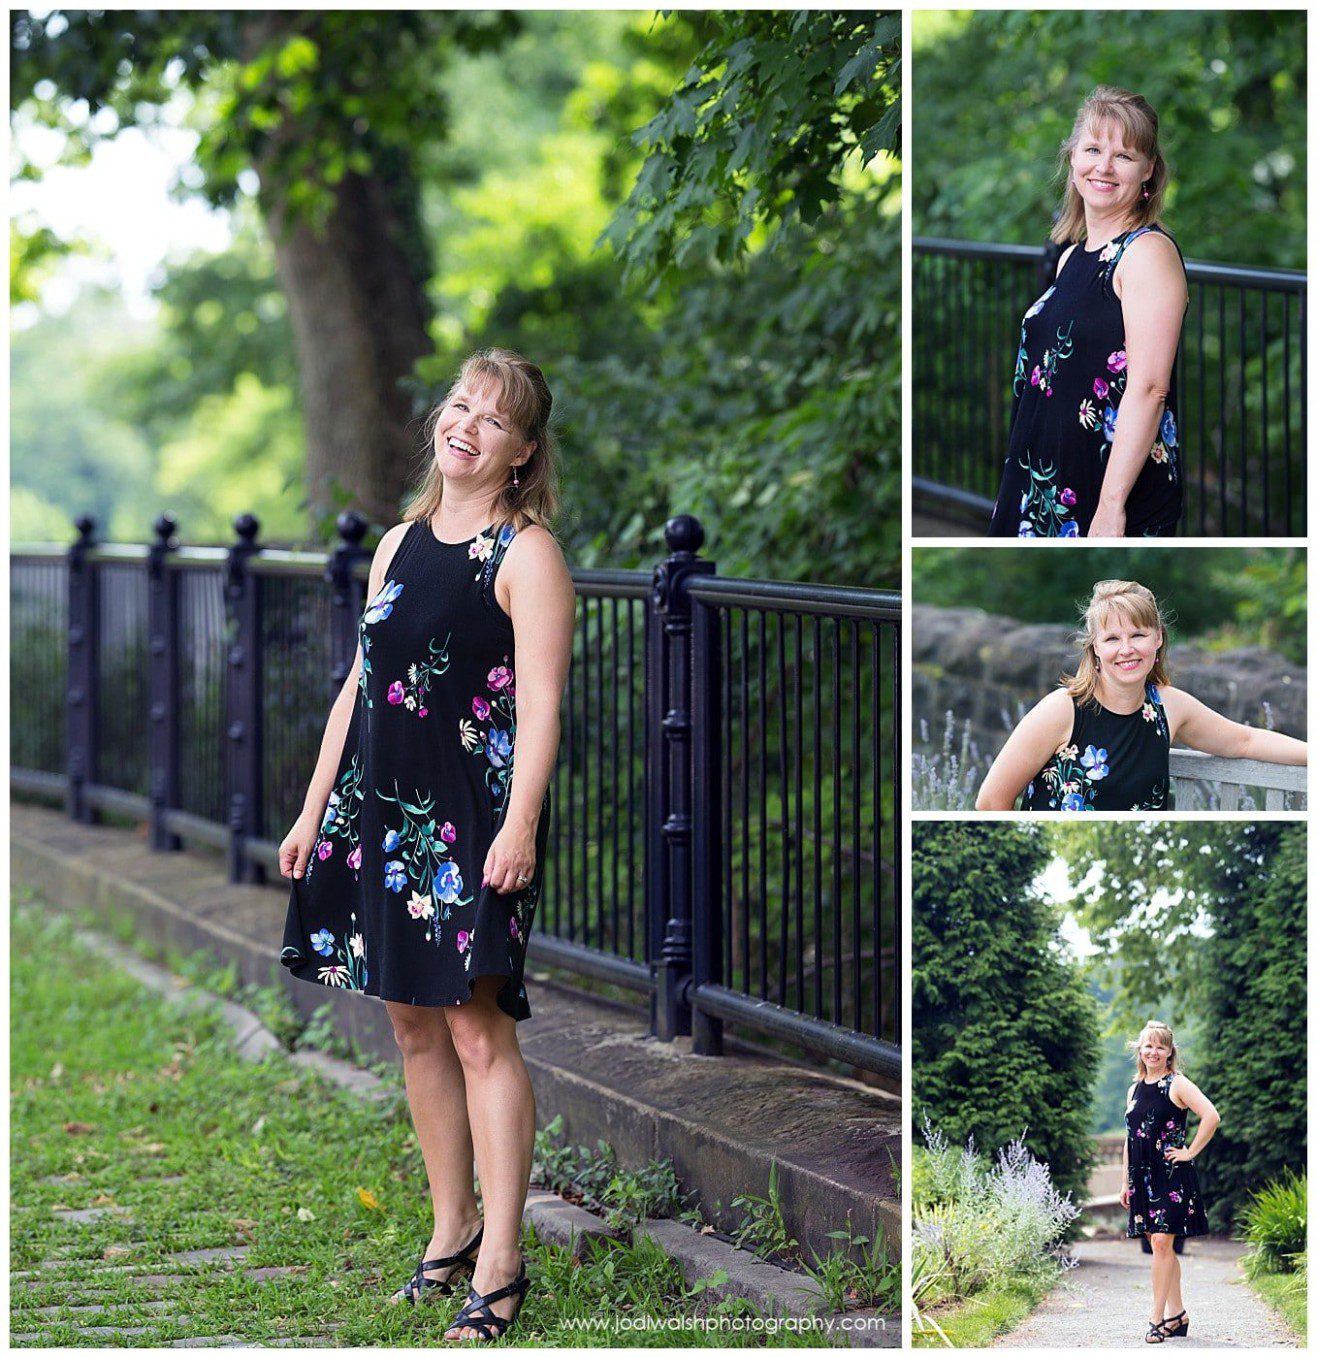 a collage of images of 4 headshots of blonde woman wearing a navy blue flowered dress. She's standing one stone path with a black iron railing. A closeup sitting on a garden bench. Another of her standing on a garden path.